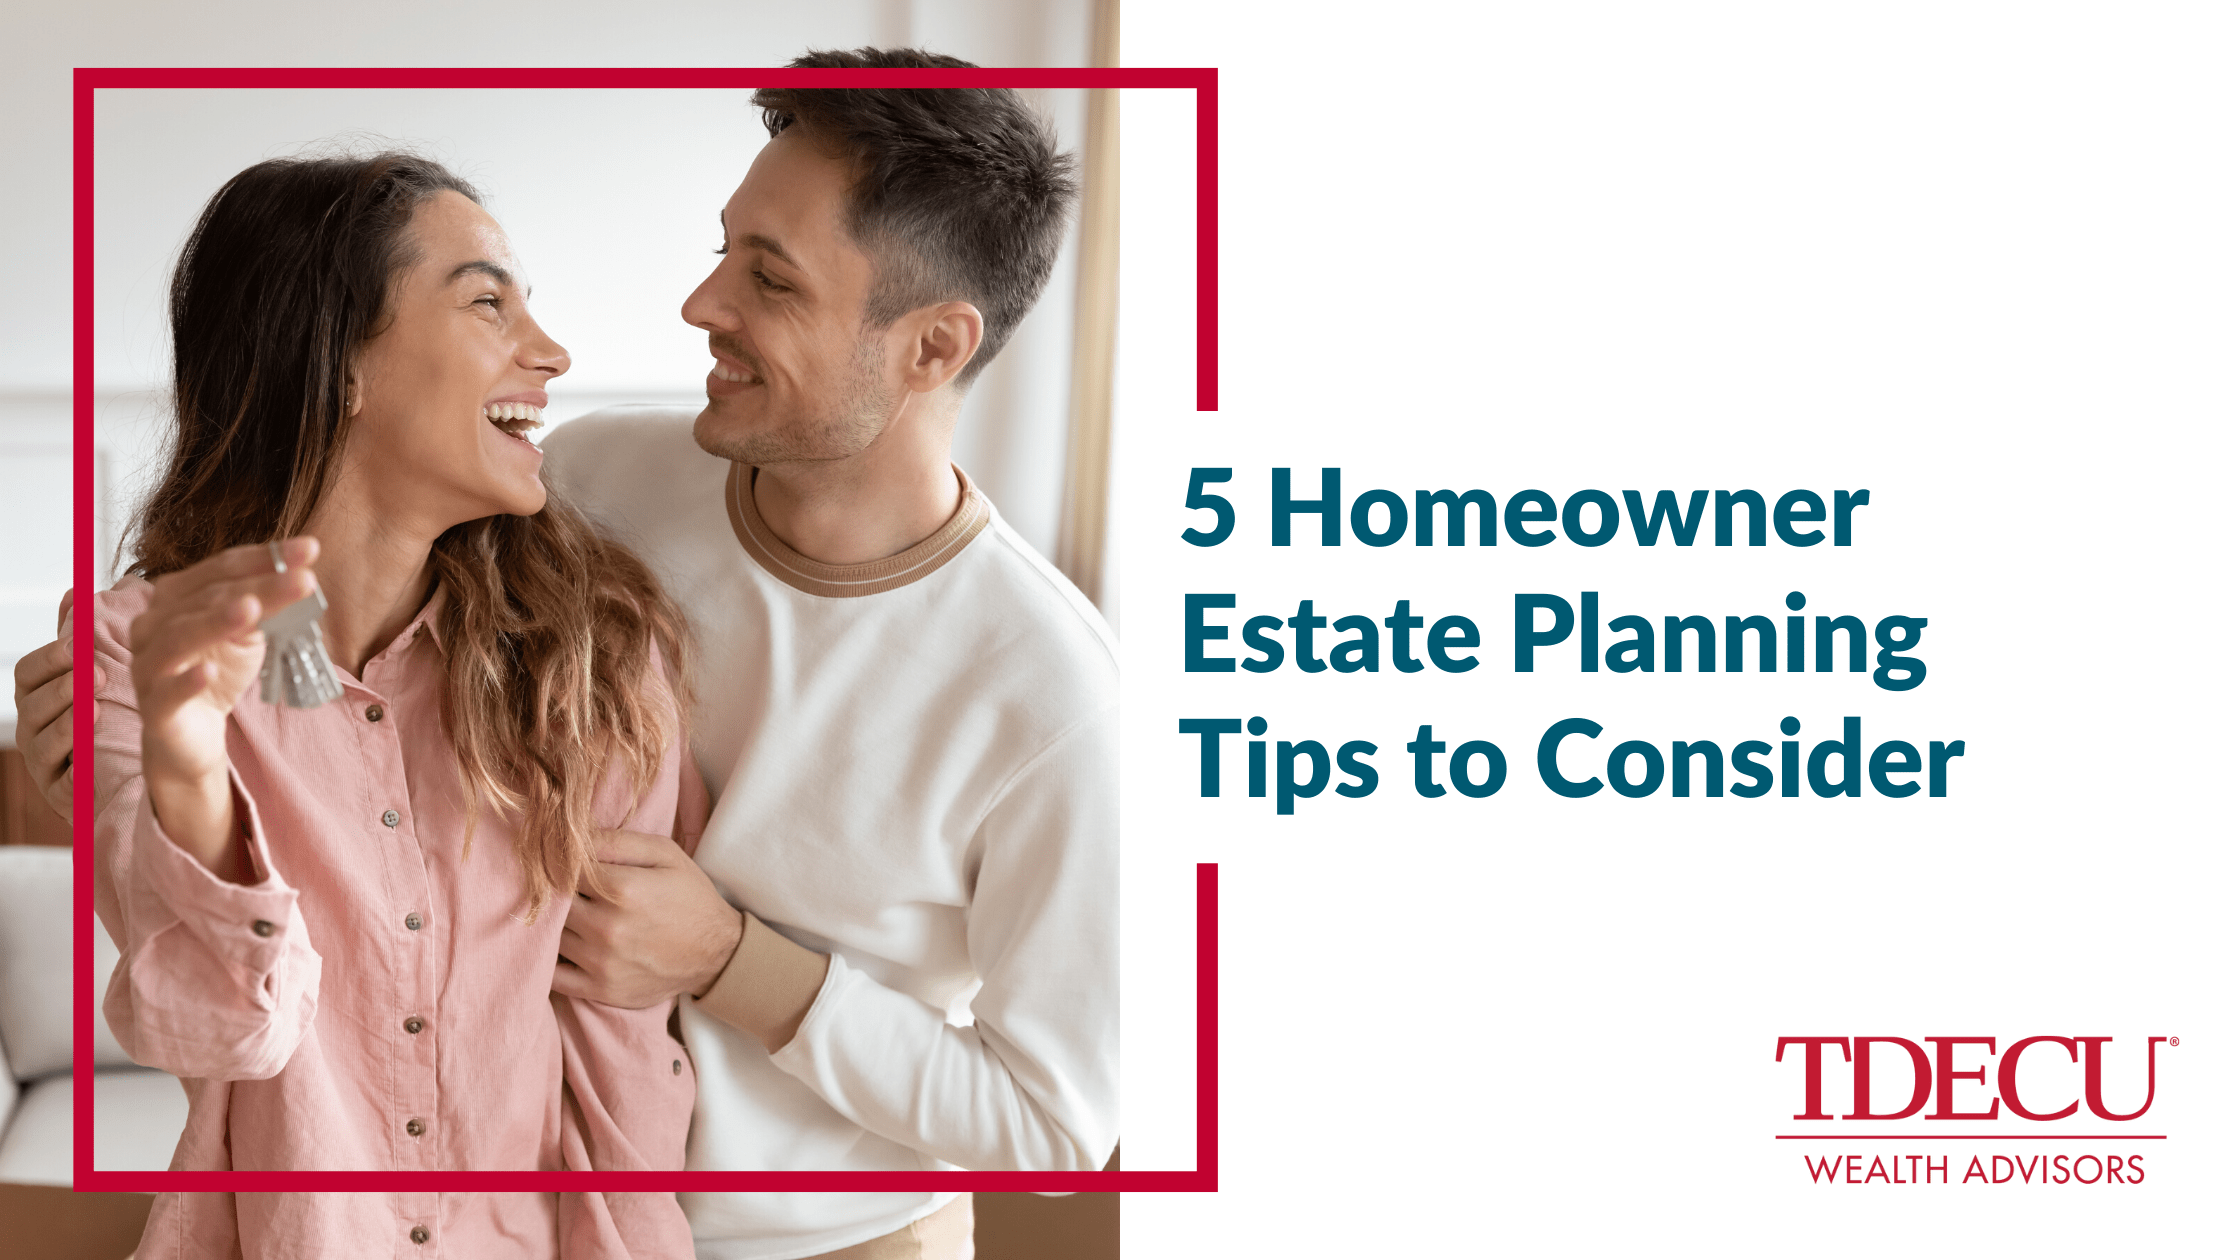 5 Homeowner Estate Planning Tips to Consider